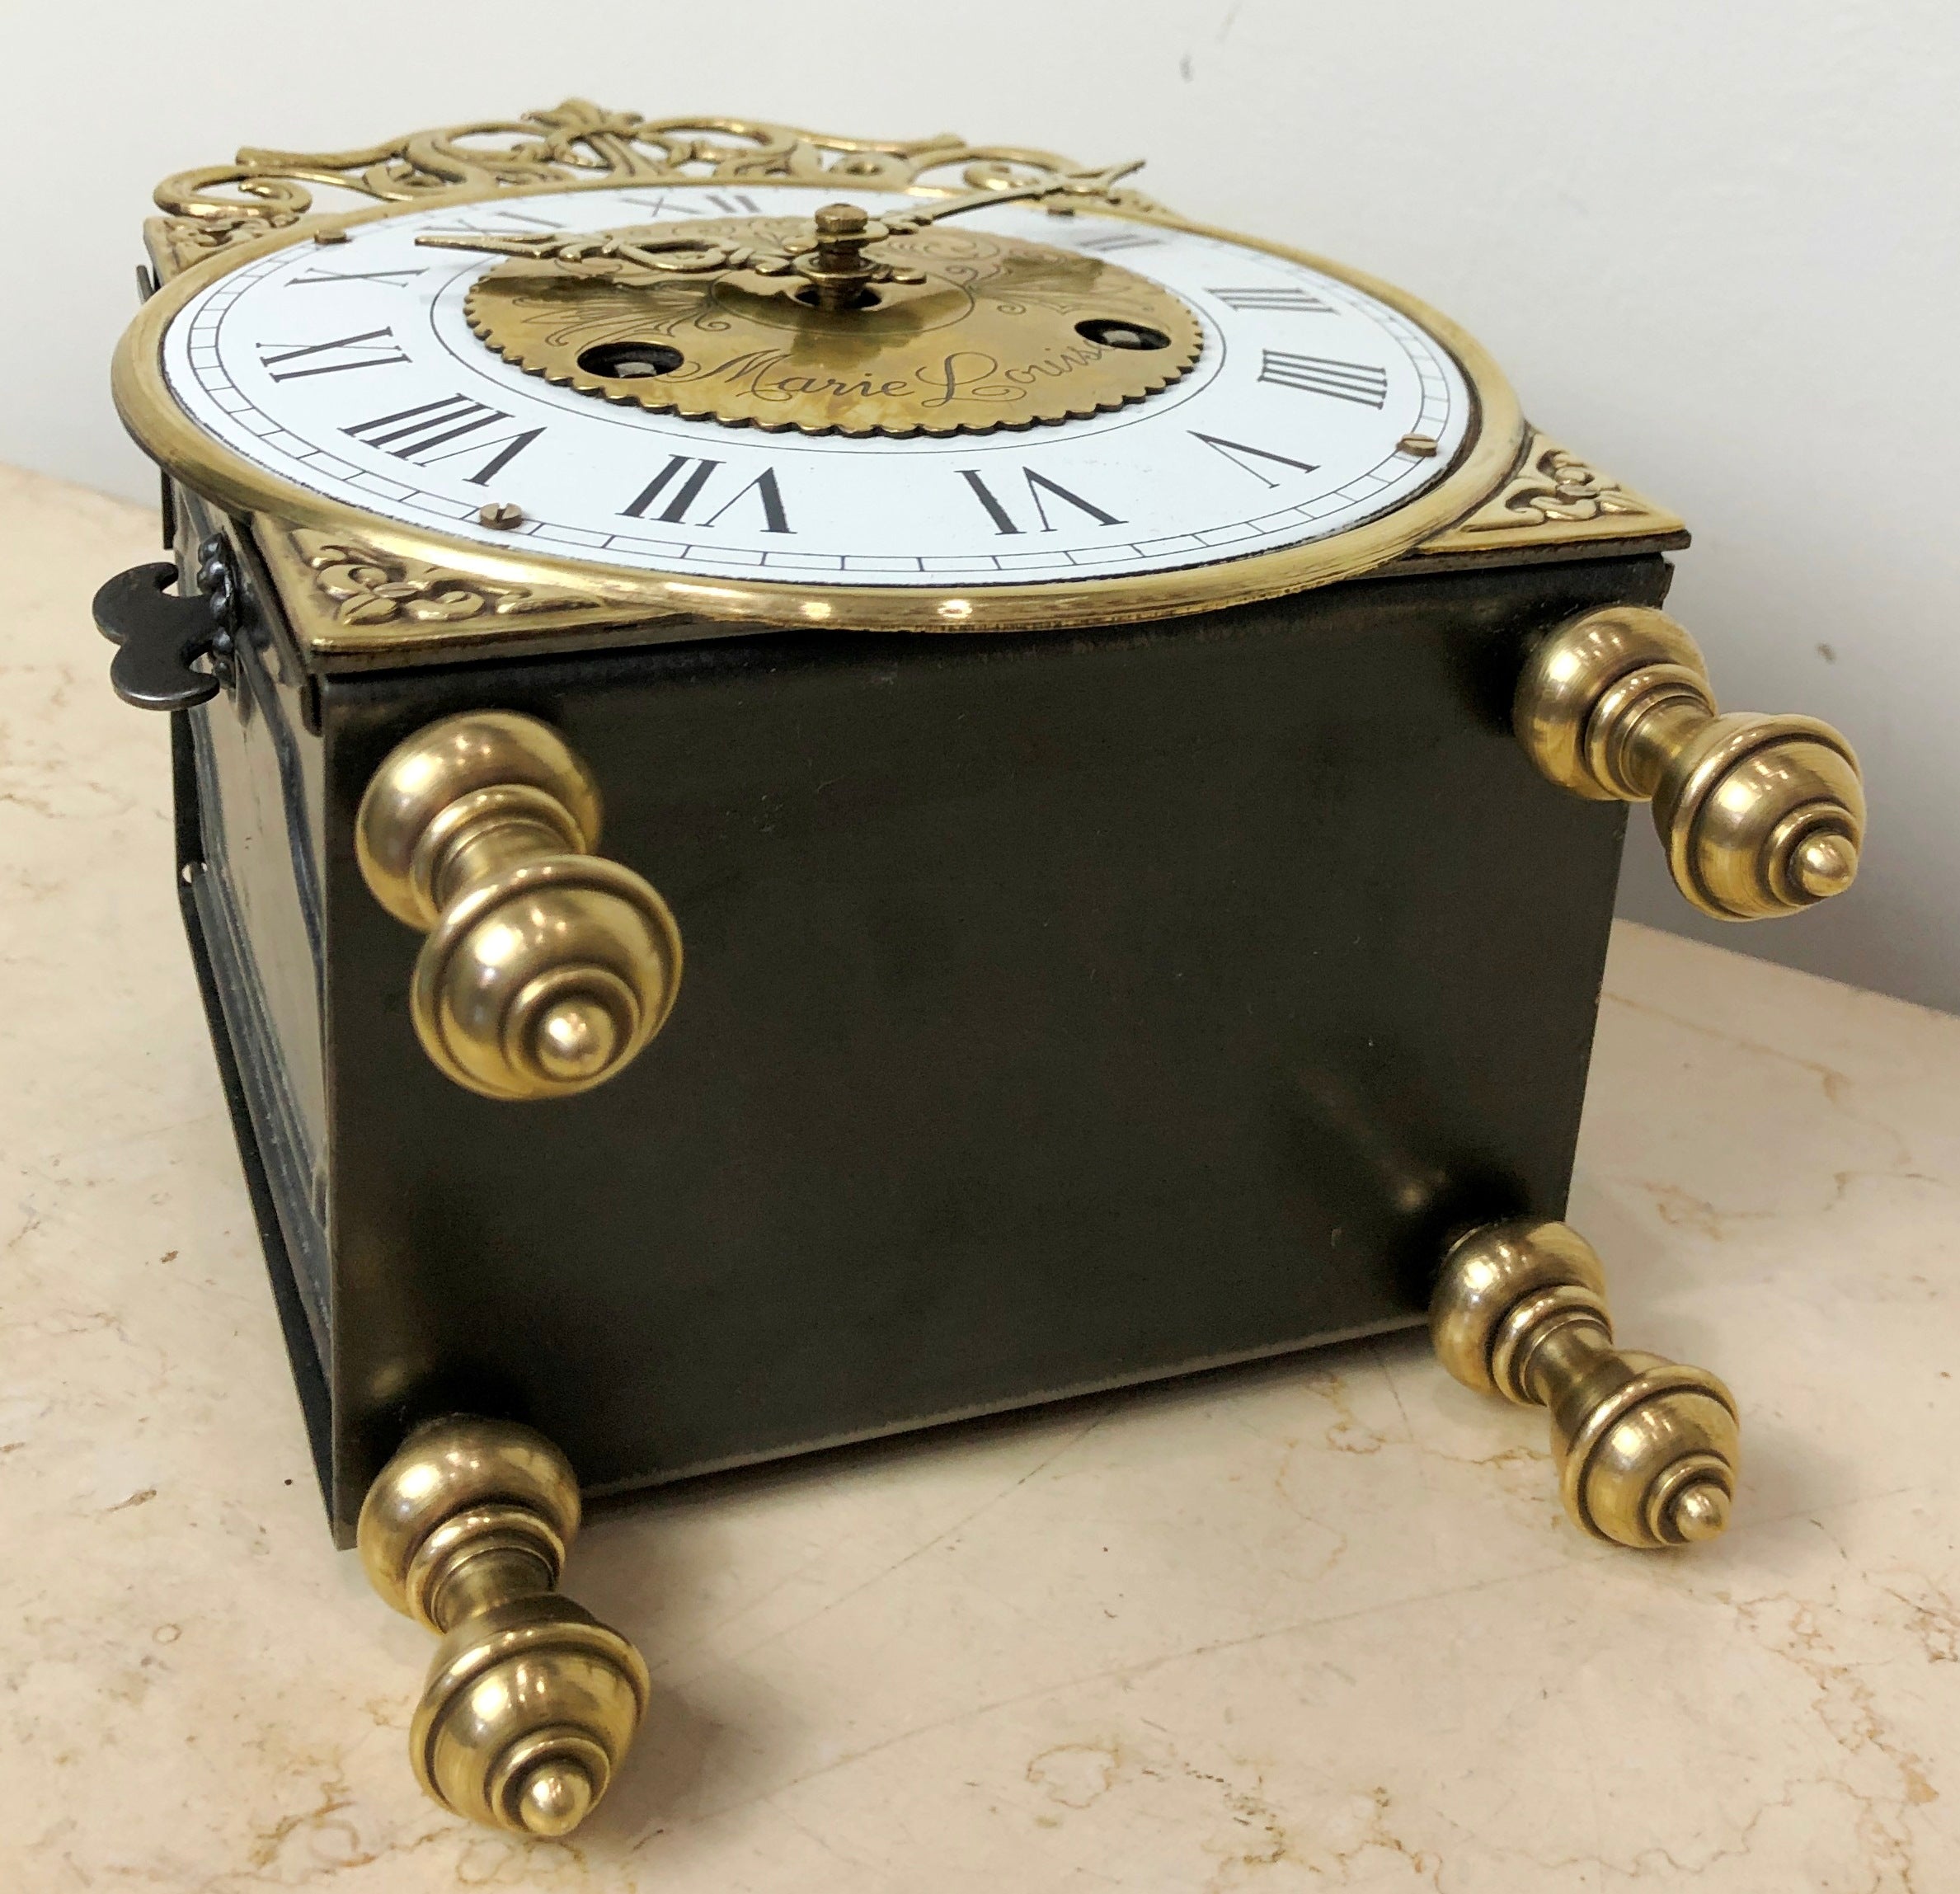 Vintage FRANZ Hermle Marie Louise Brass Bell Chime Mantel Clock | eXibit collection